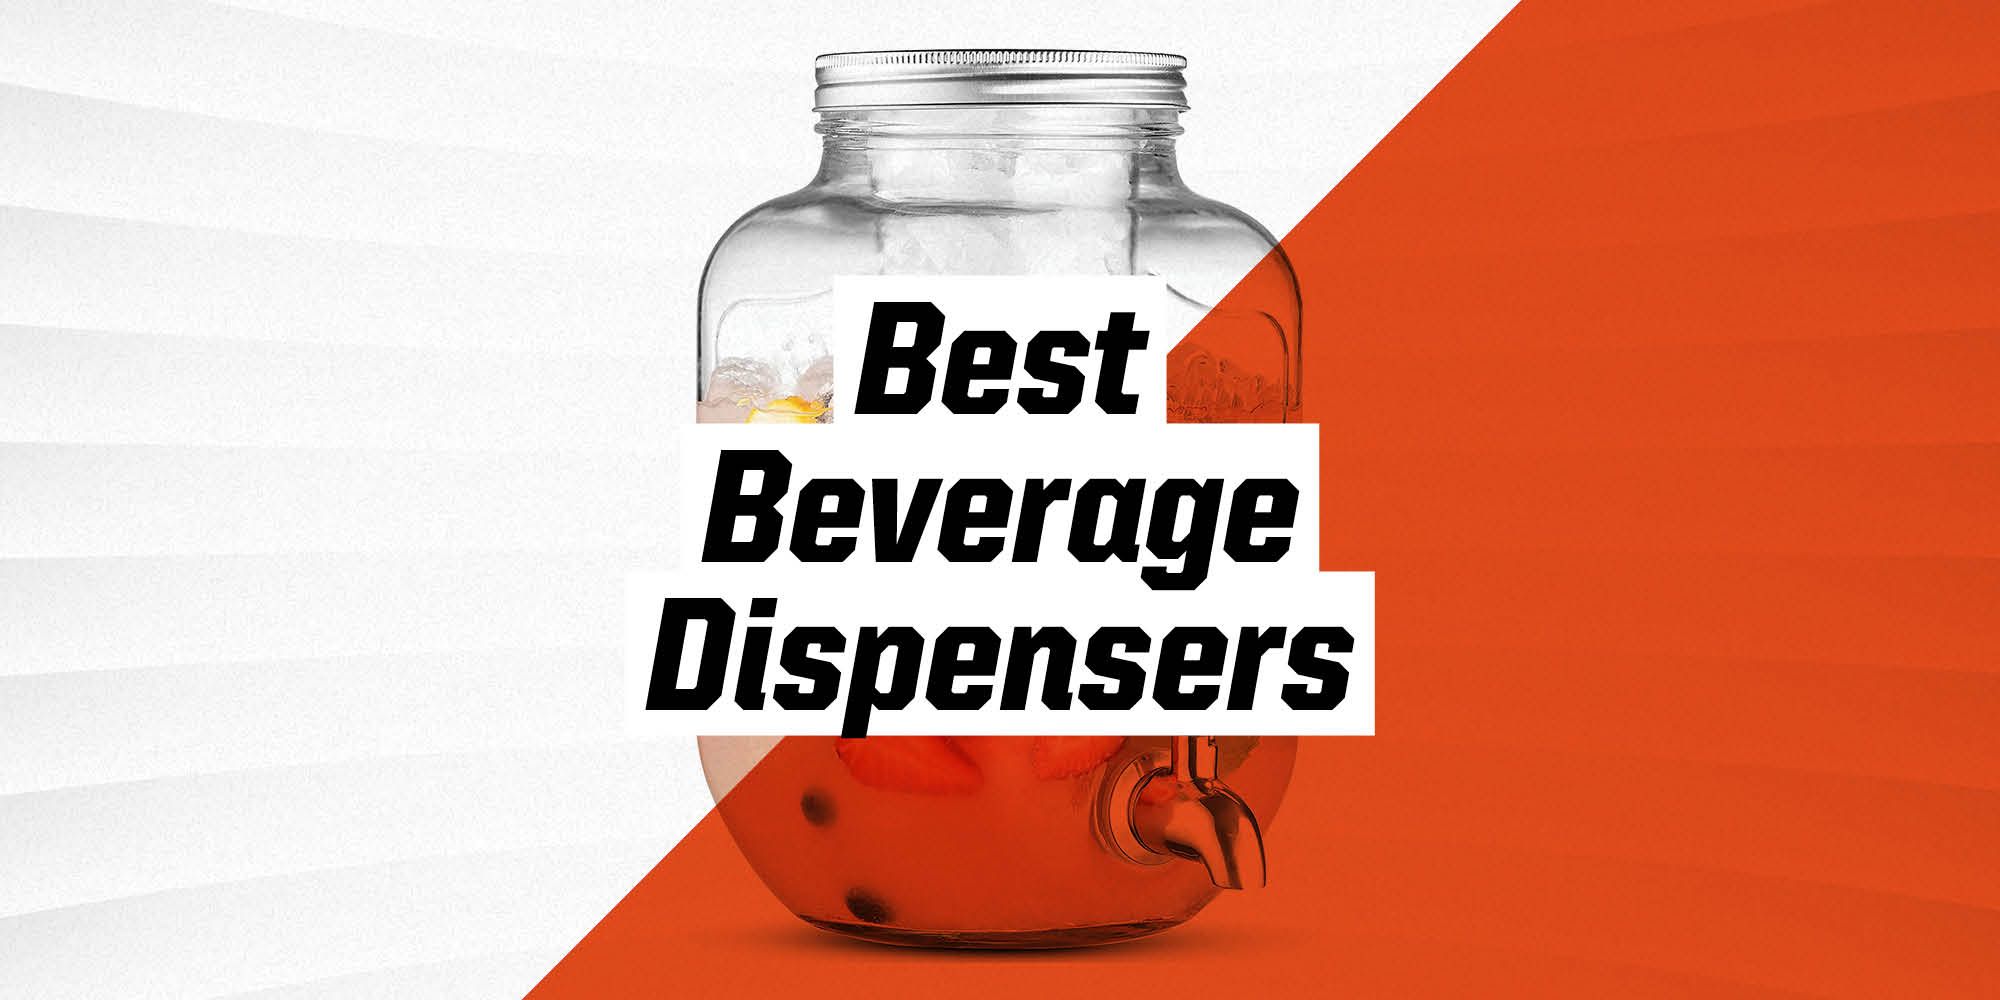 A classy drink dispenser and recipes to go with it… Beat the heat